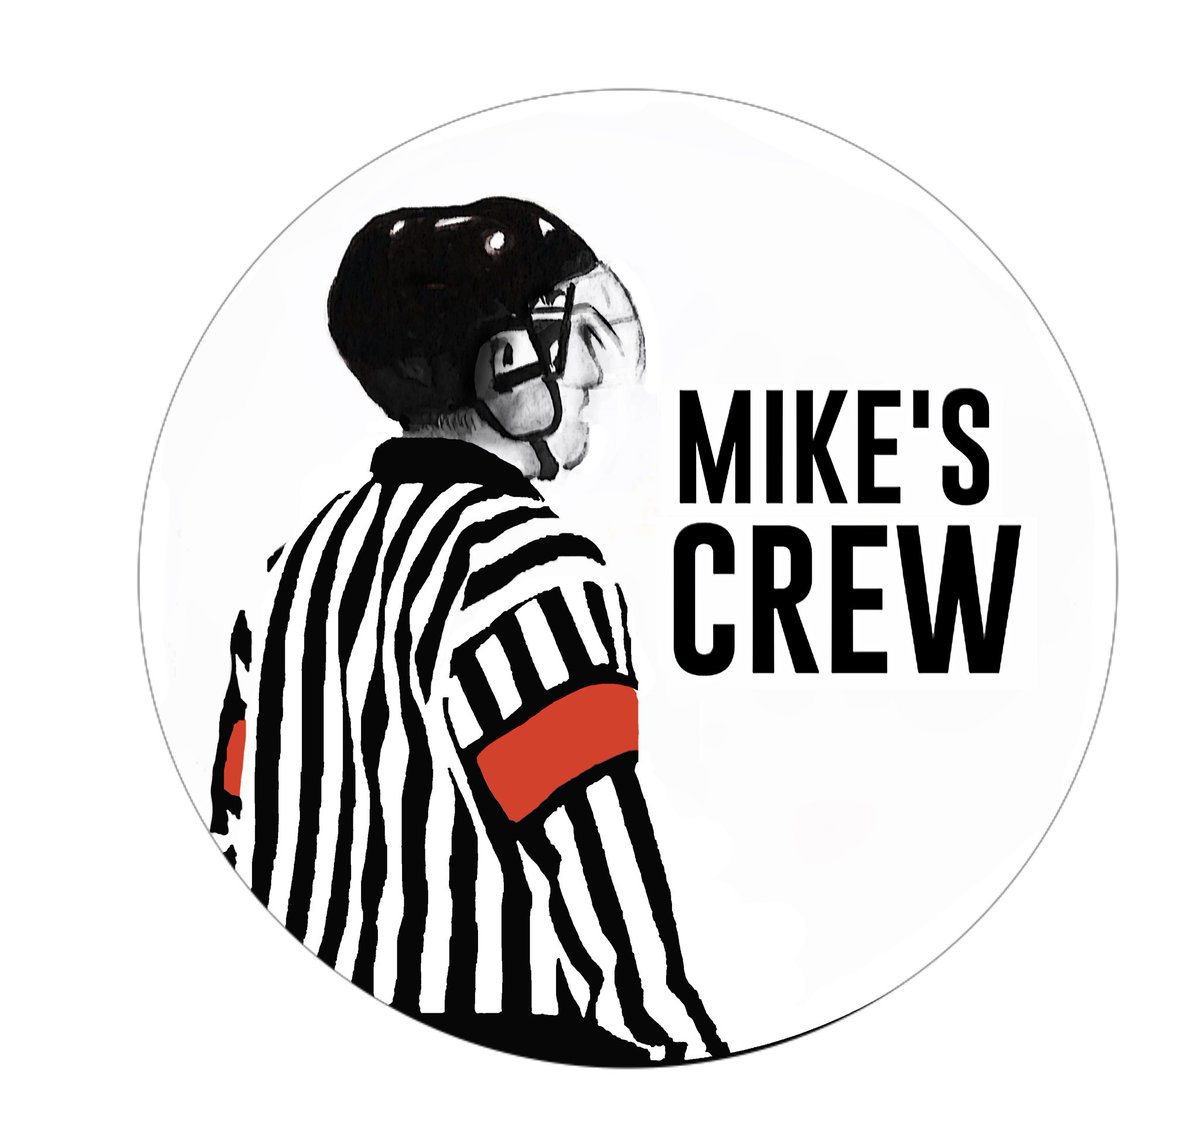 We would like to see all minor association come out to support their officials at our tournament this weekend! May 3 & 4, Goulds Arena! @AvalonCeltics @MtPearlBlades @ne_eagles @PmhaWarriors @SrBreakers @CeebeeStars @CBRRenegades @Goulds_Minor